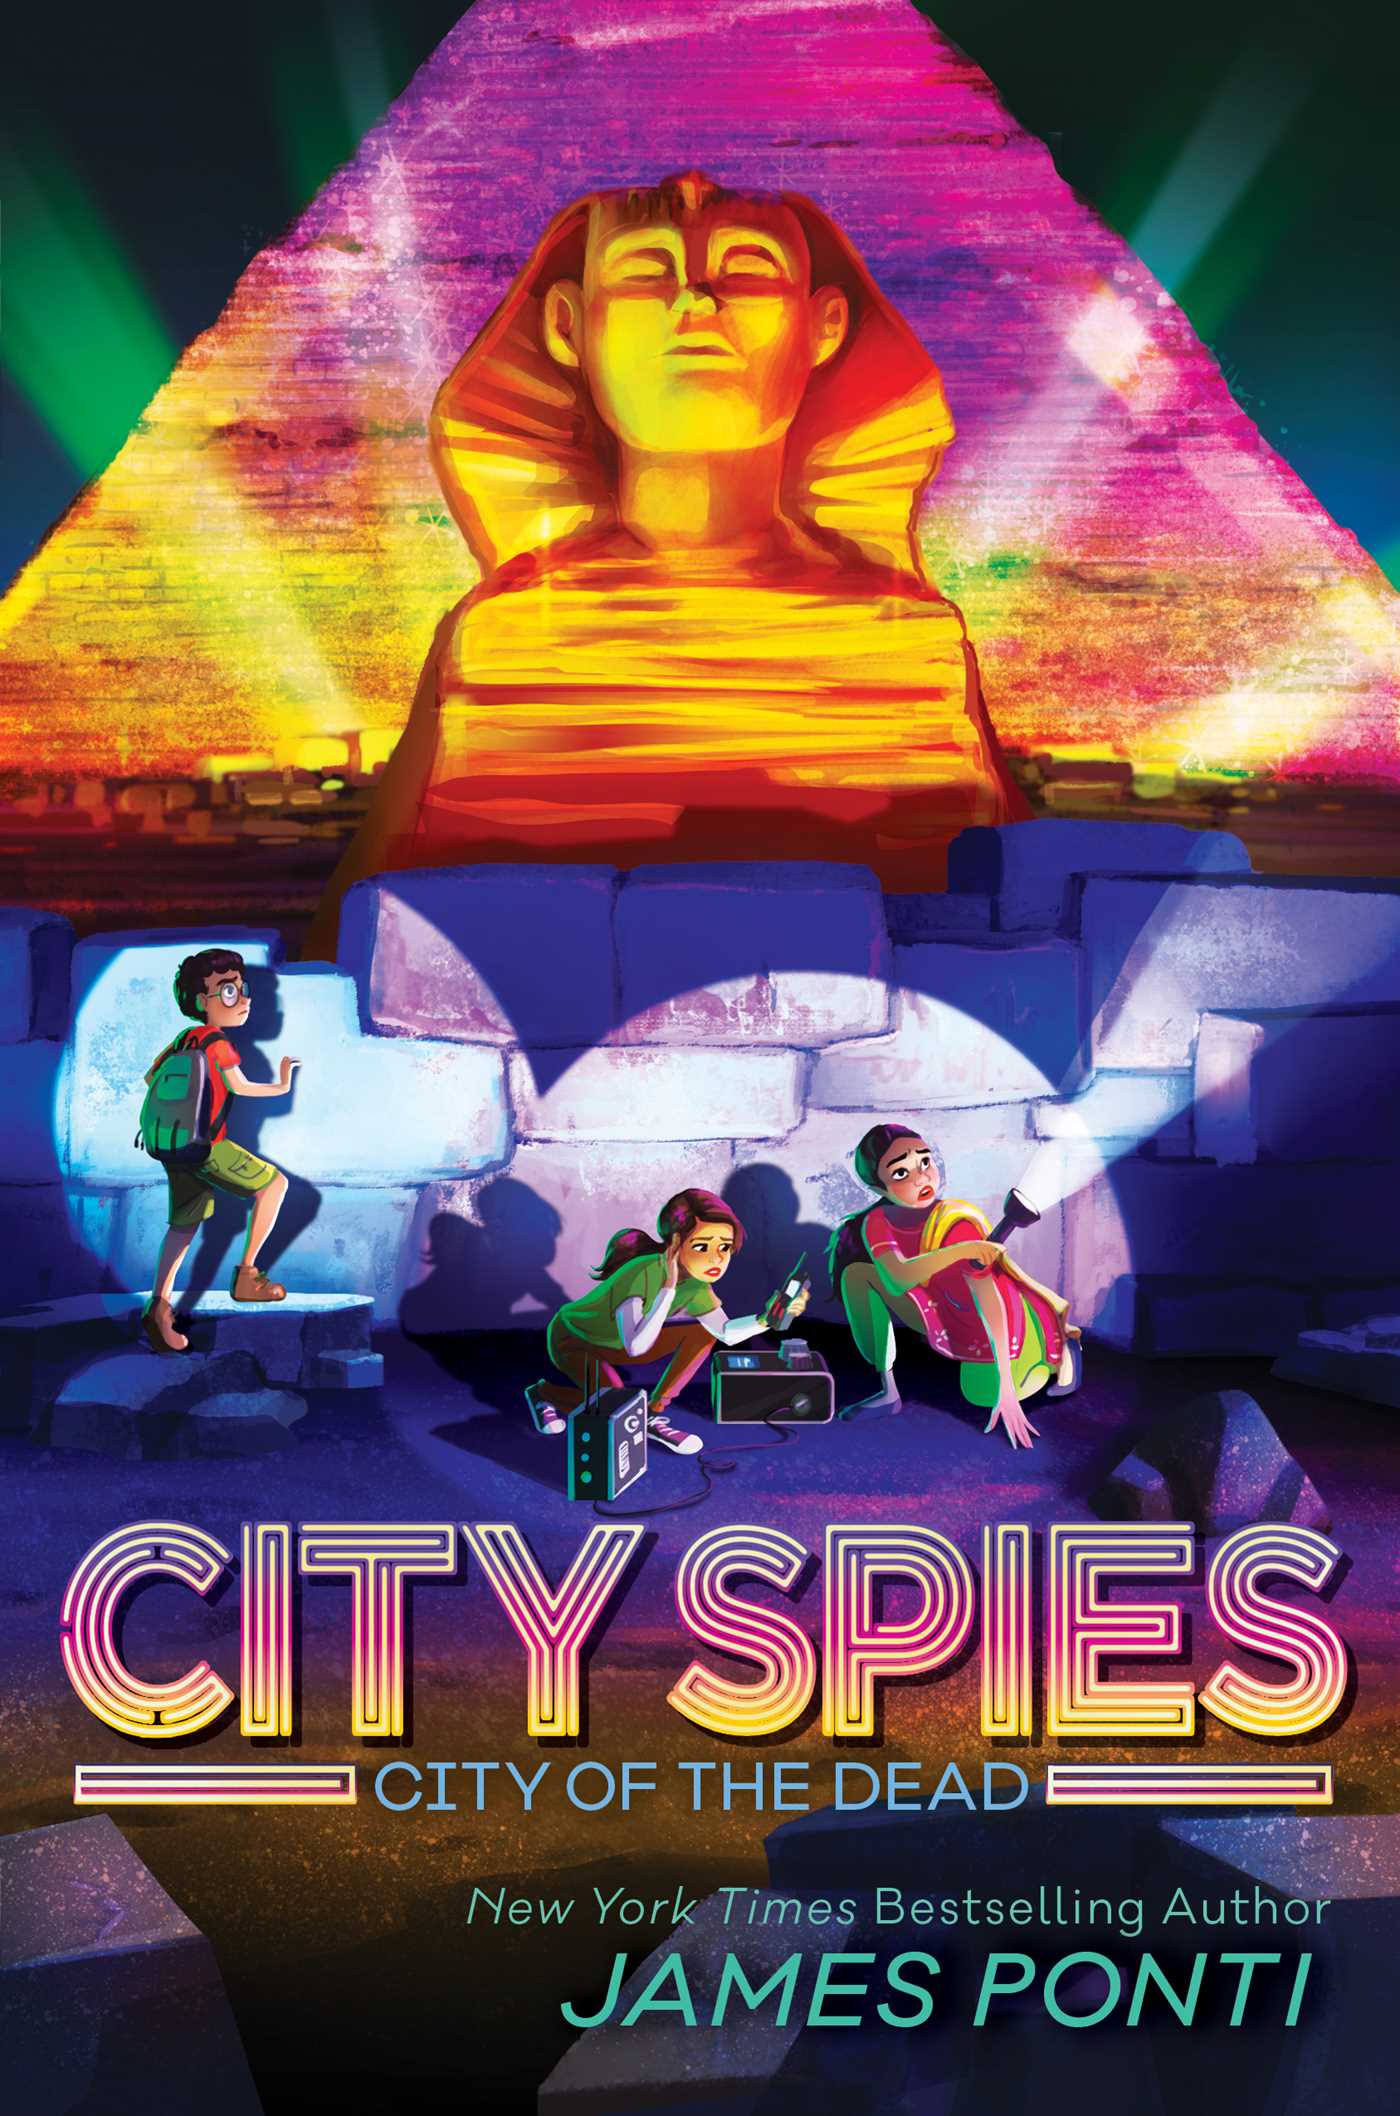 City of the Dead (City Spies #4 ) by  James Ponti